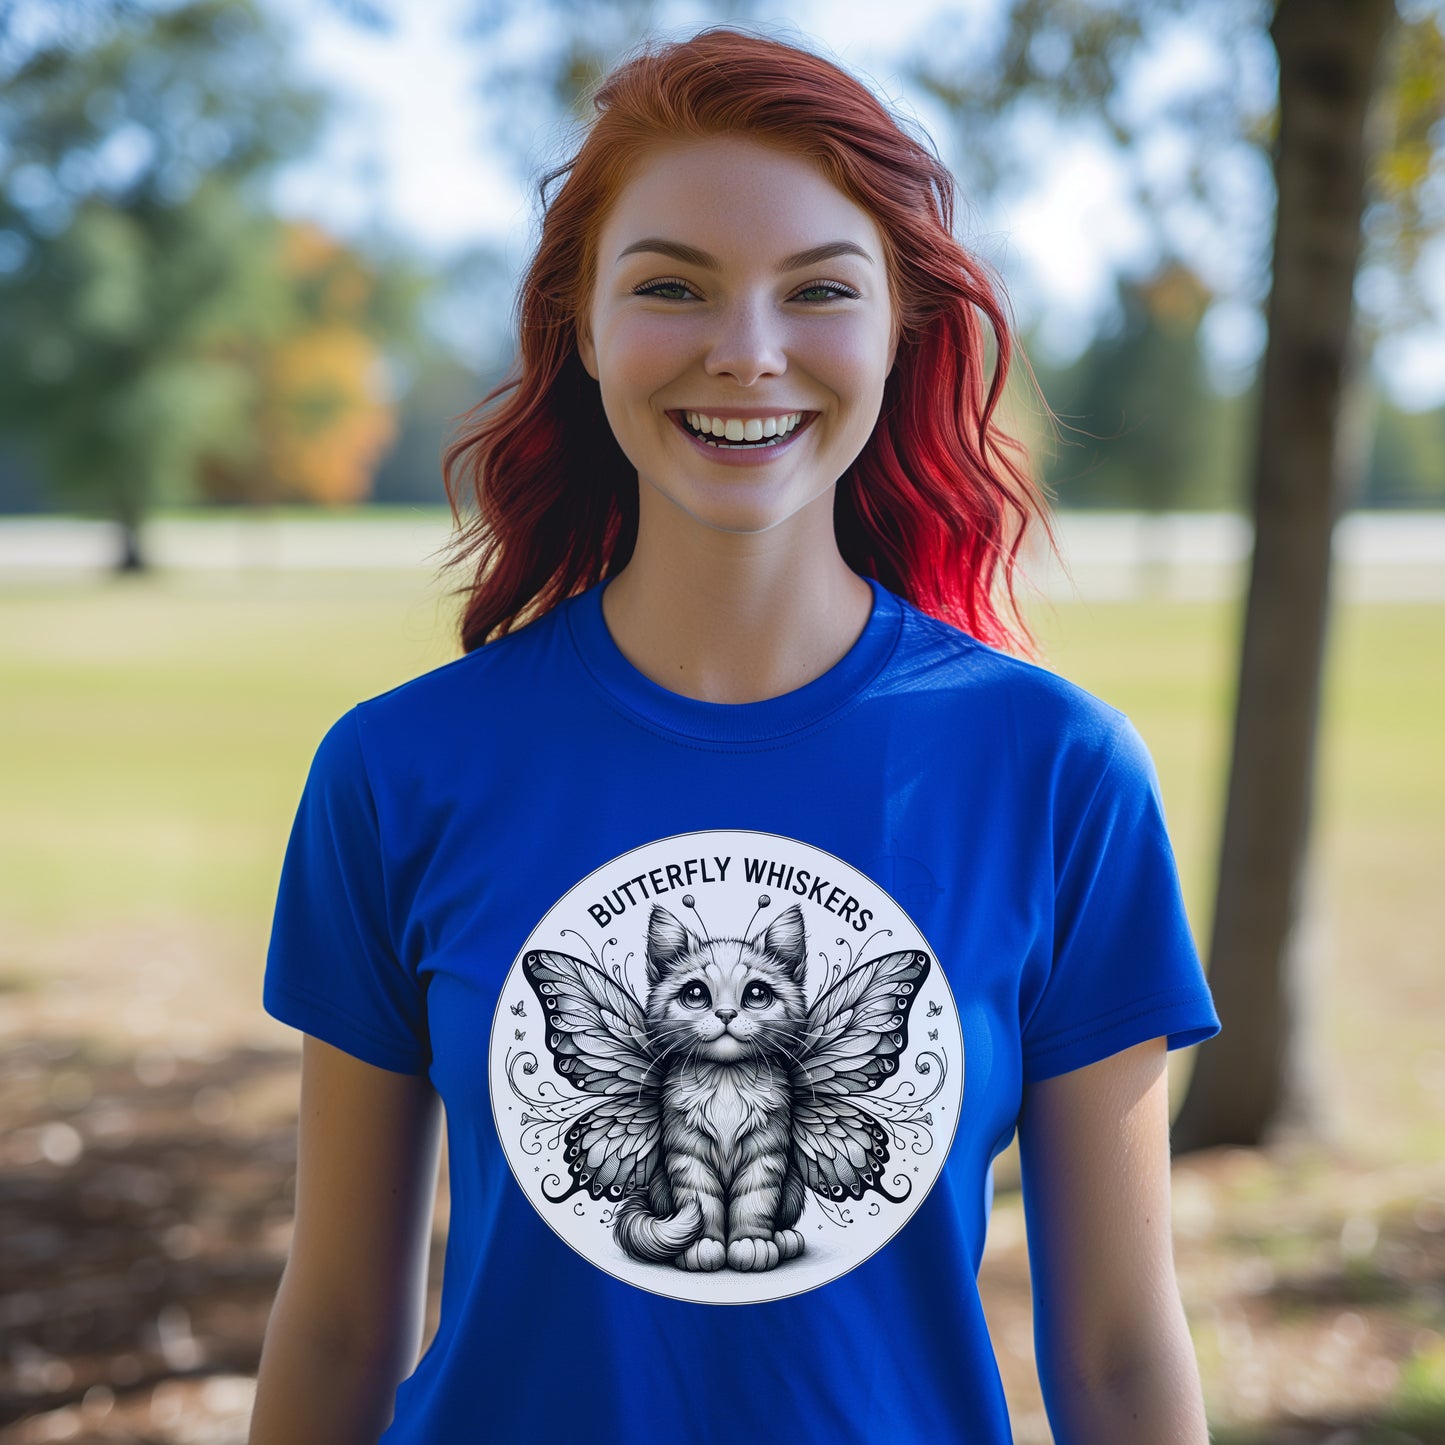 Fly into Whimsy with the Butterfly-Winged Cat T-Shirt. Perfect Cat Lover T-Shirt, Fantasy Winged Cat, Fantasy Cat T-Shirt, Winged Cat Shirt